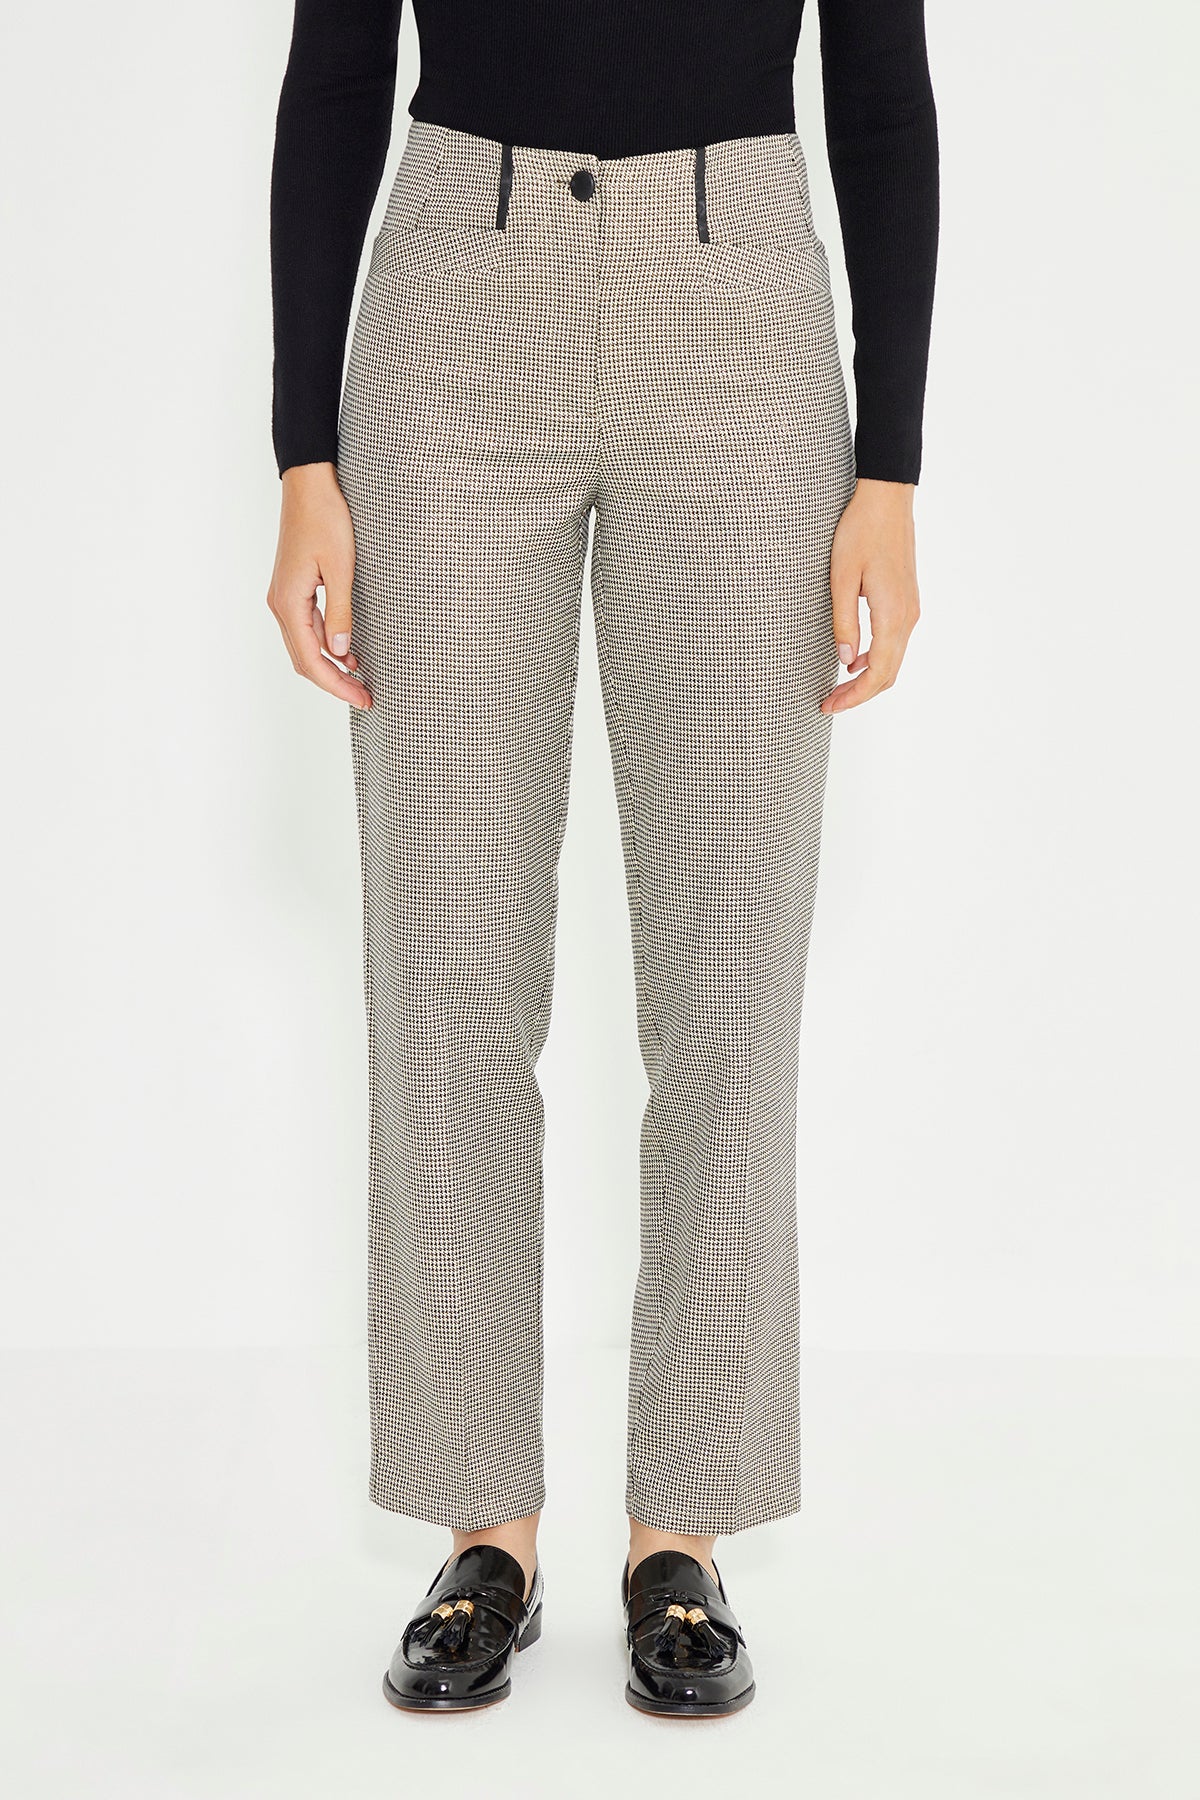 Houndstooth Patterned Leather Piping Detail Carrot Fit Women's Trousers